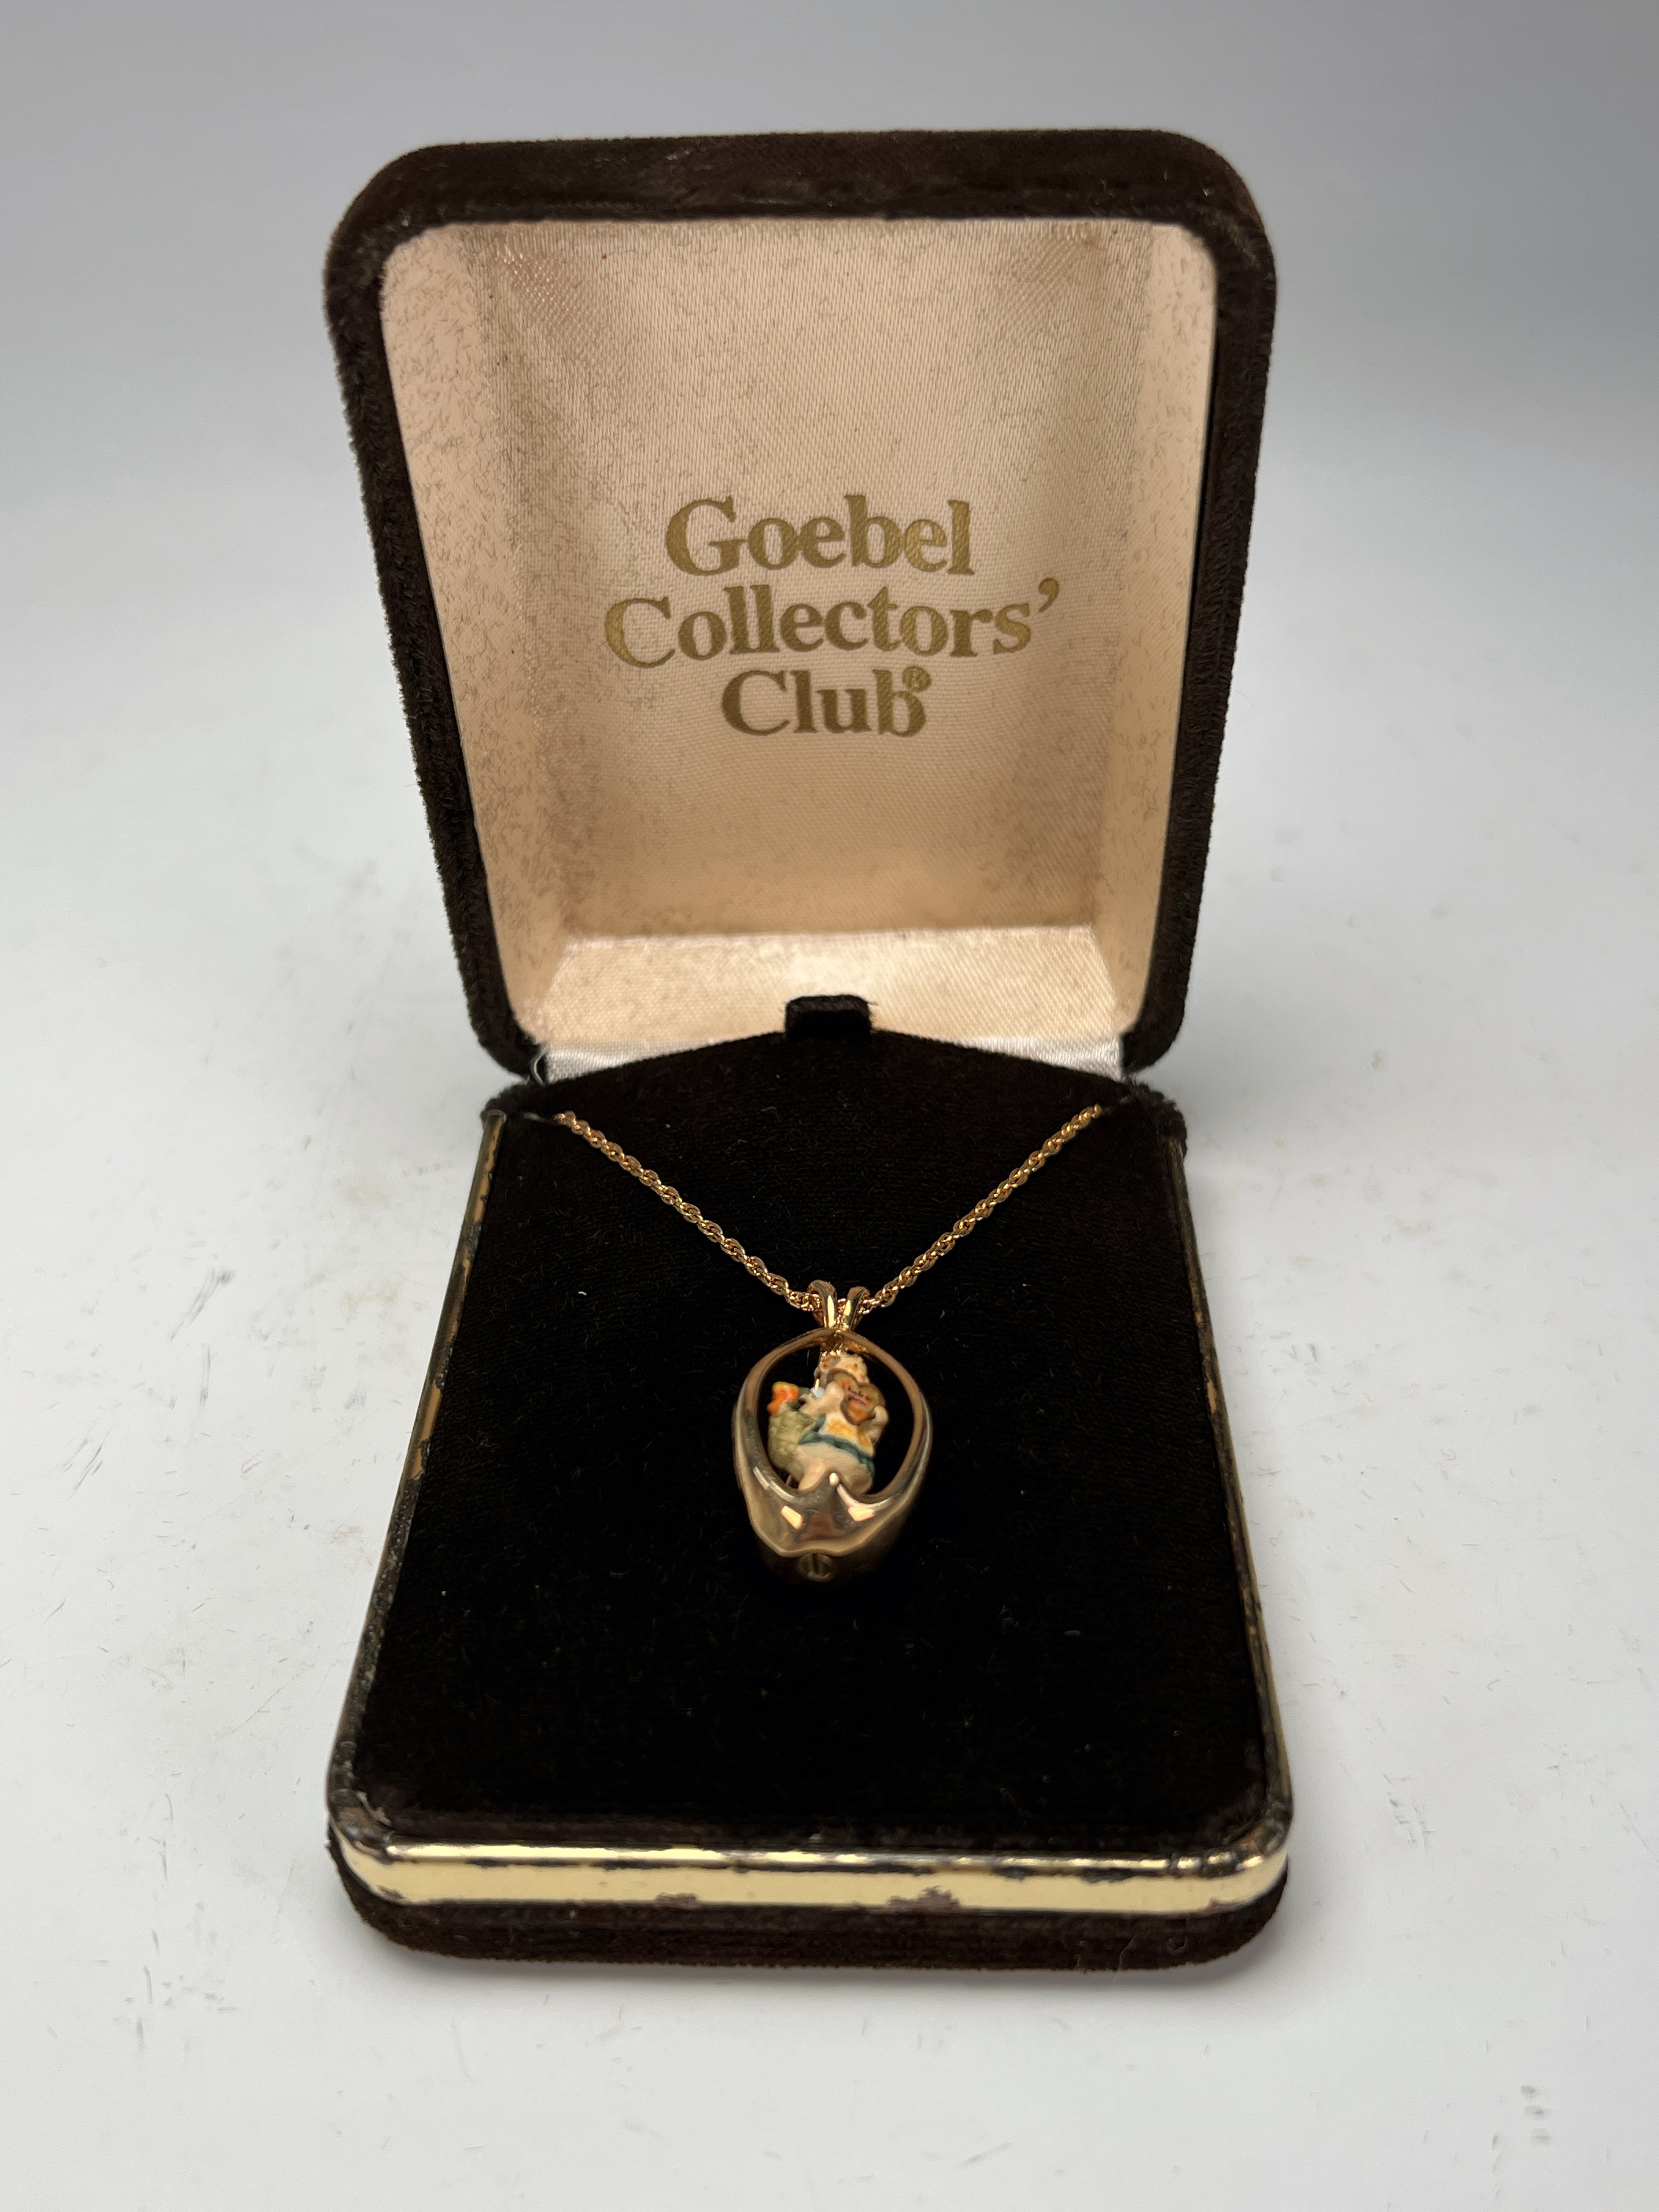 Hummel Collectors Club Necklace In Box image 2